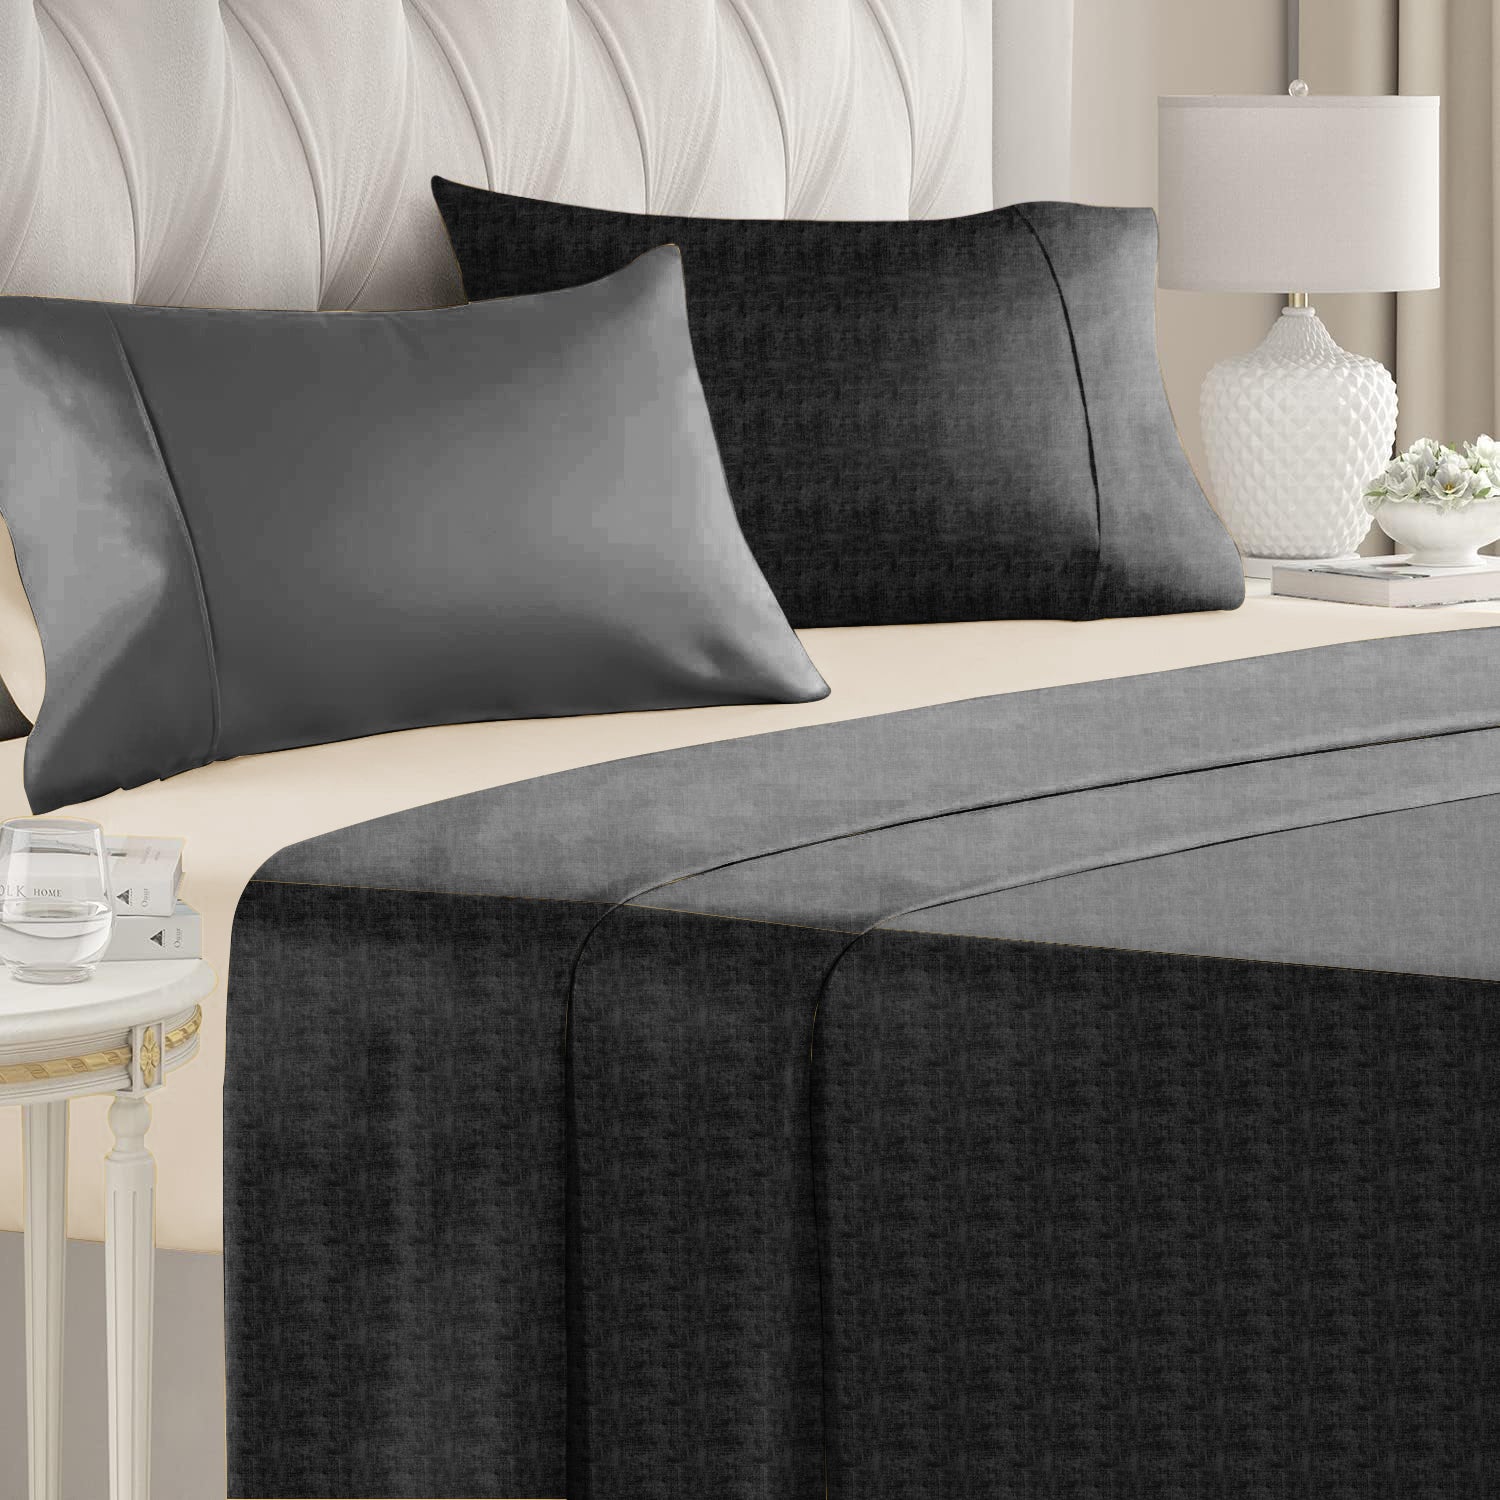 Jodhpur Texture Bedsheet for Double Bed with 2 PillowCovers King Size (104" X 90") Black